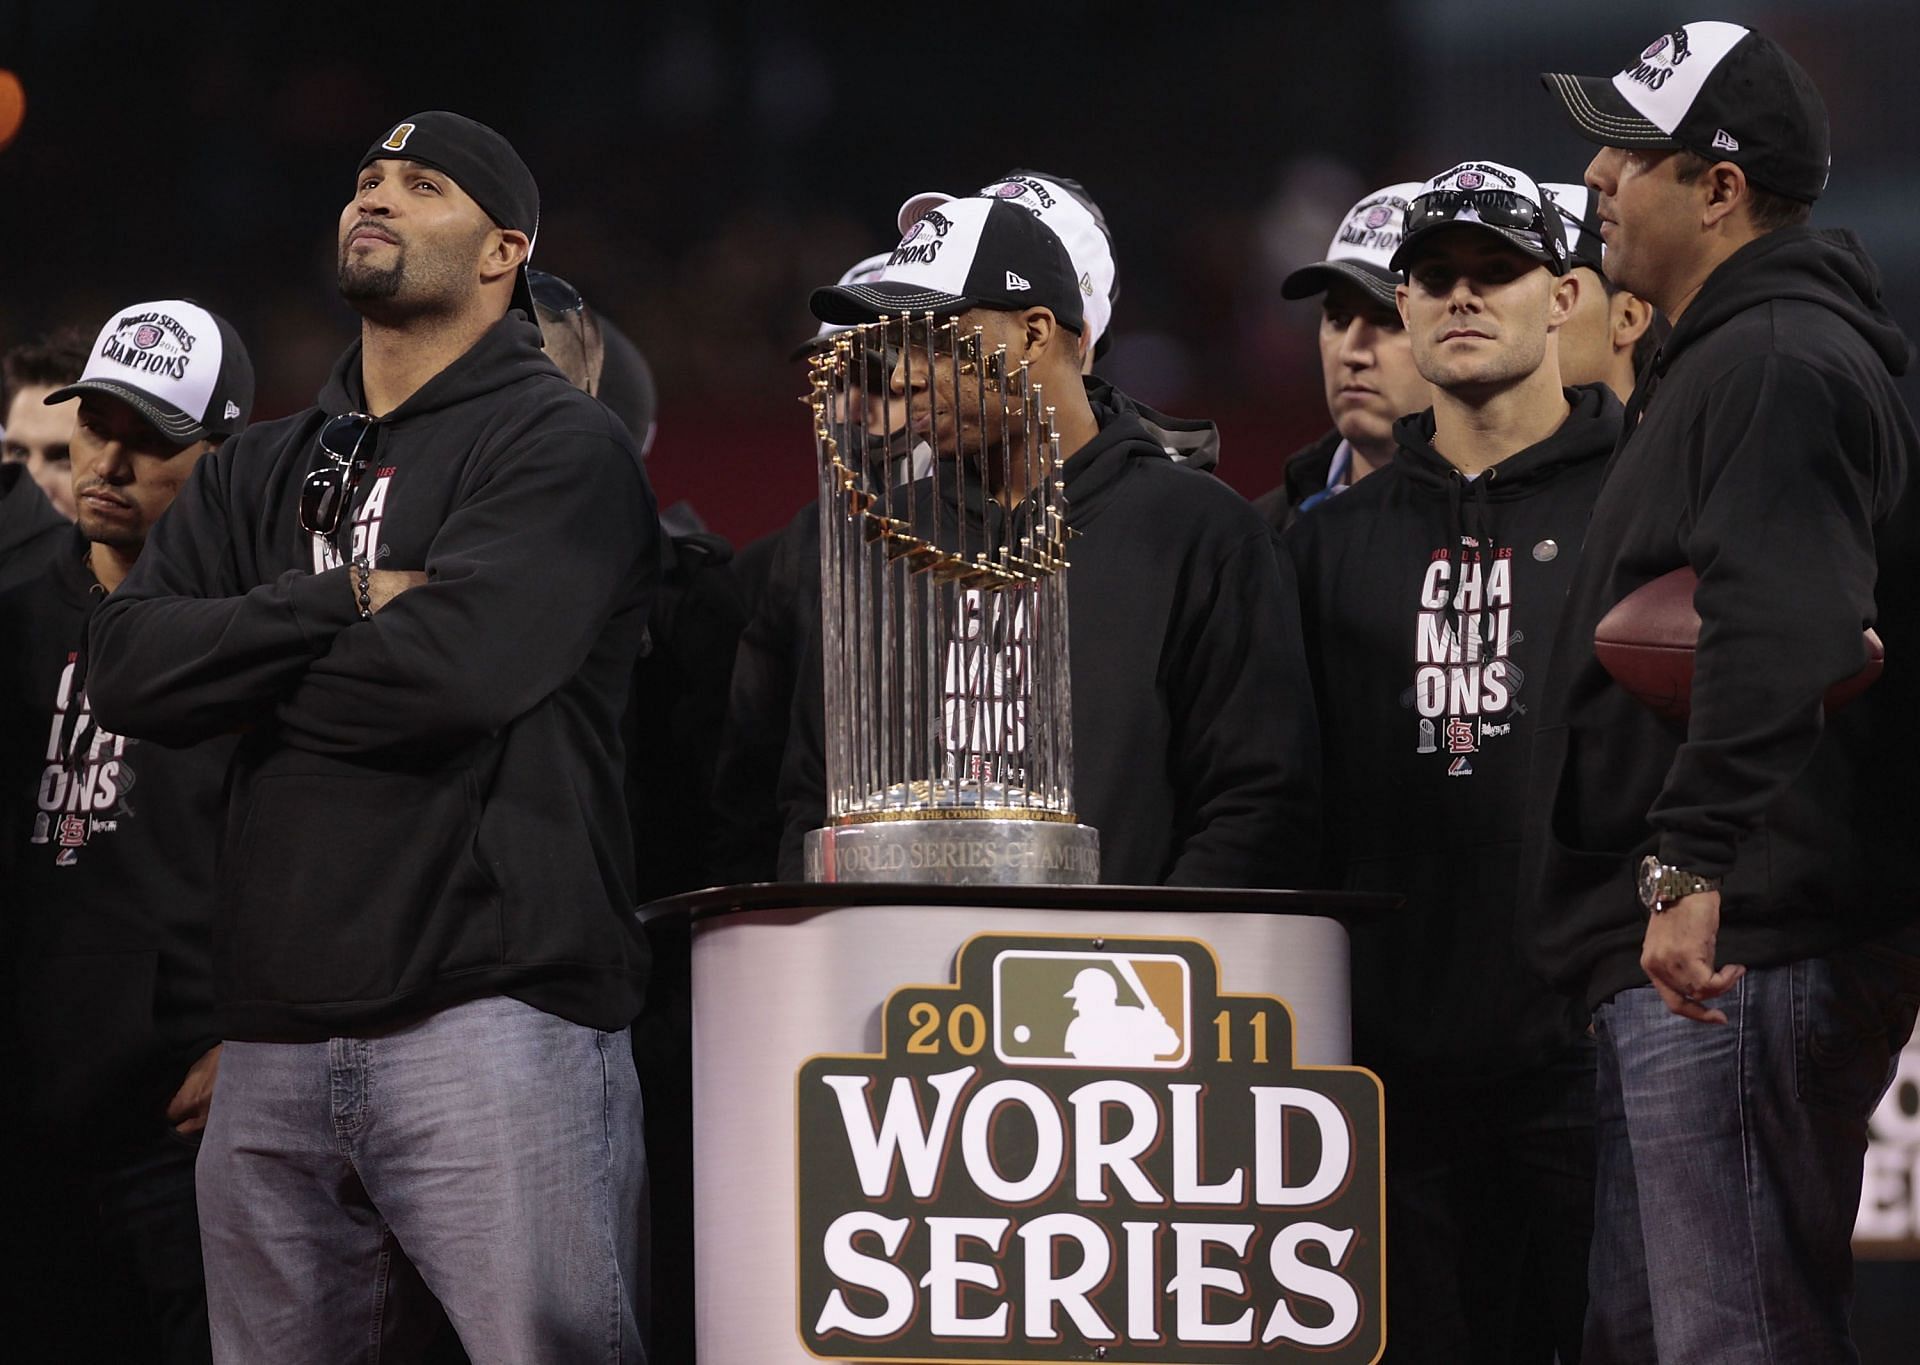 Albert Pujols of the St. Louis Cardinals stands next to the World Series trophy.